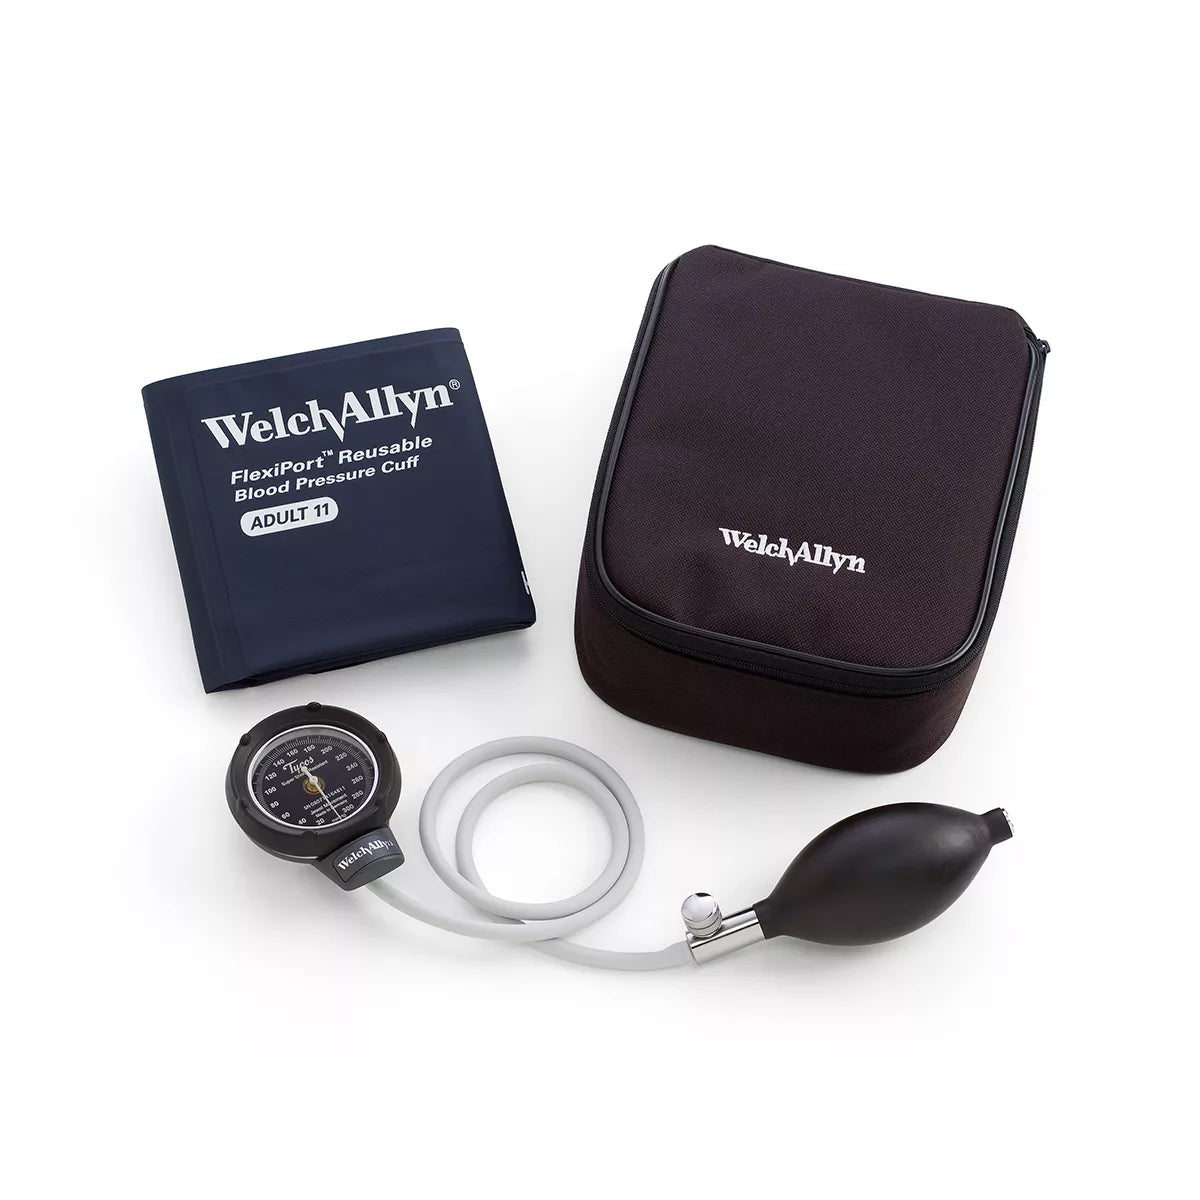 Welch Allyn Tycos DS48 Pocket Aneroid Sphygmomanometer with DuraShock Gear Free W/ Size-11 Adult Reusable (Two Piece), 2-Tube Cuff Welch Allyn